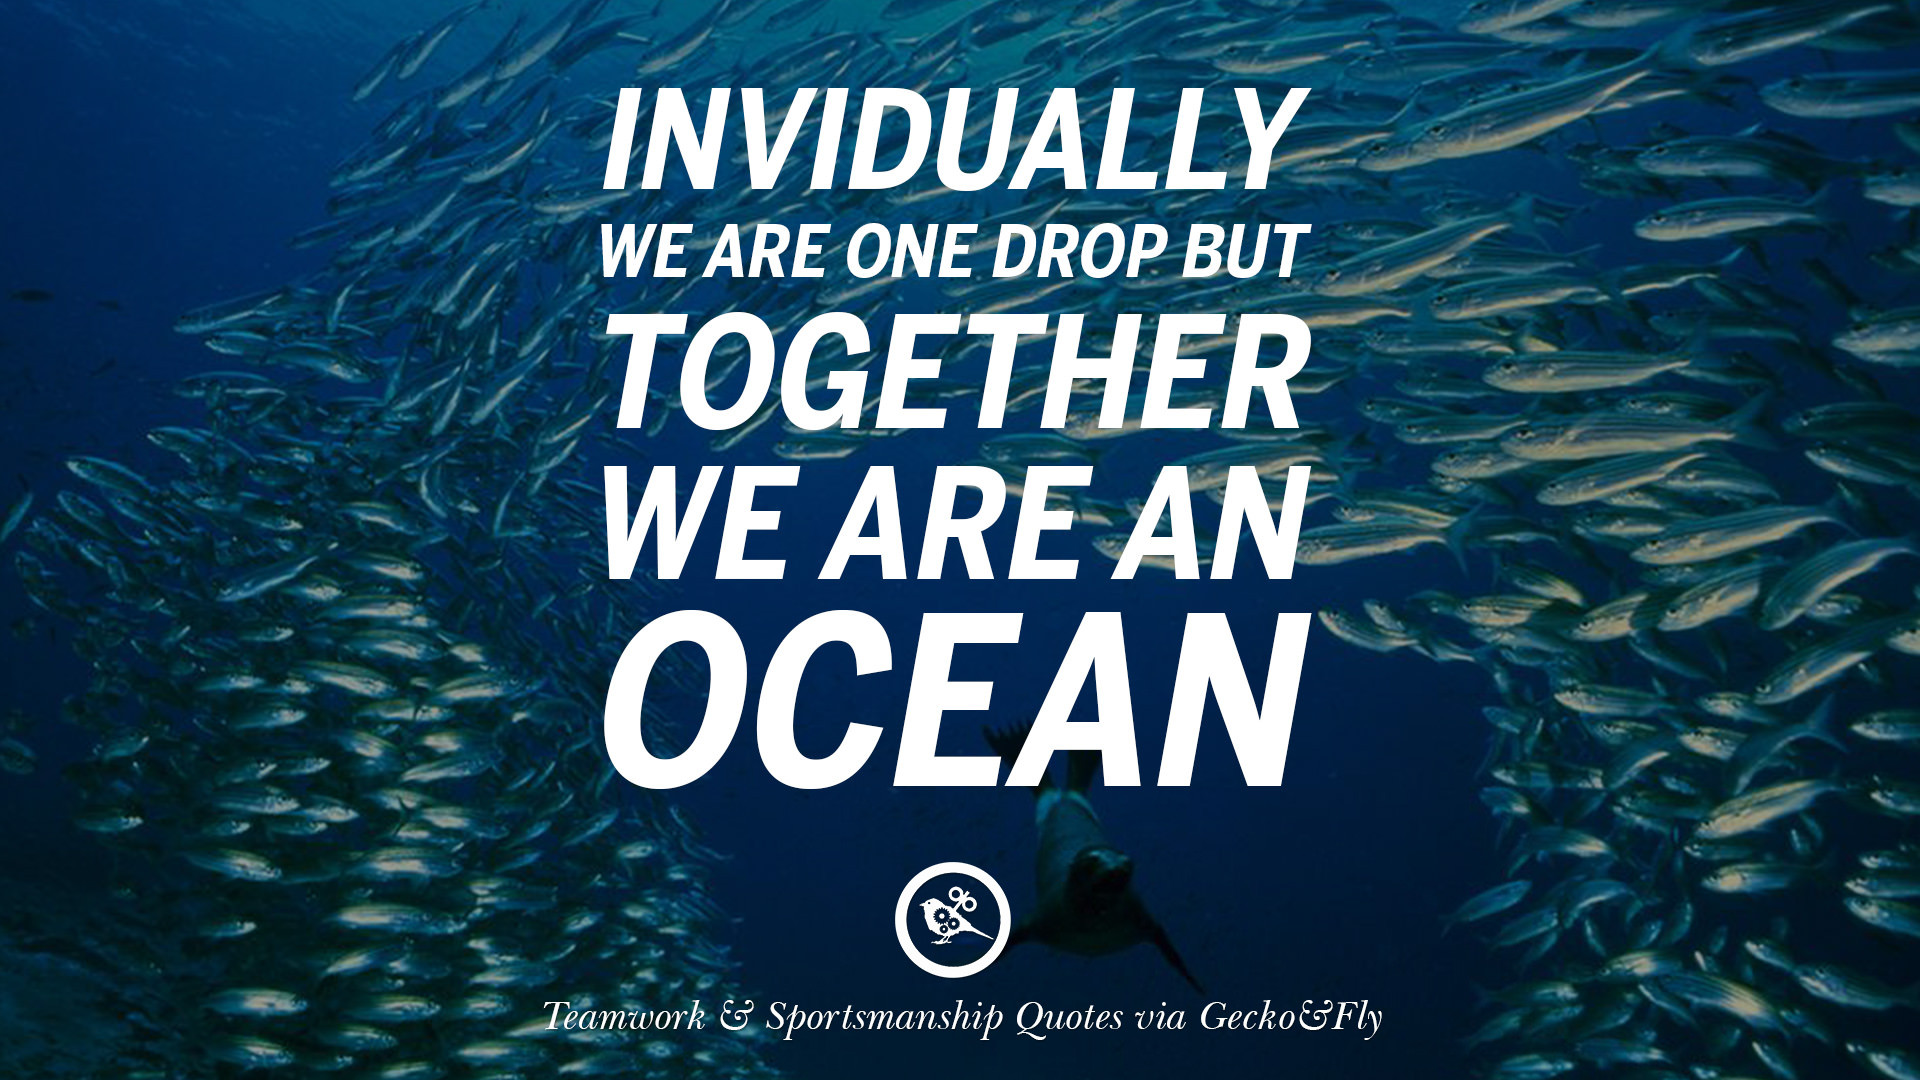 Motivational Teamwork Quotes
 50 Inspirational Quotes About Teamwork And Sportsmanship